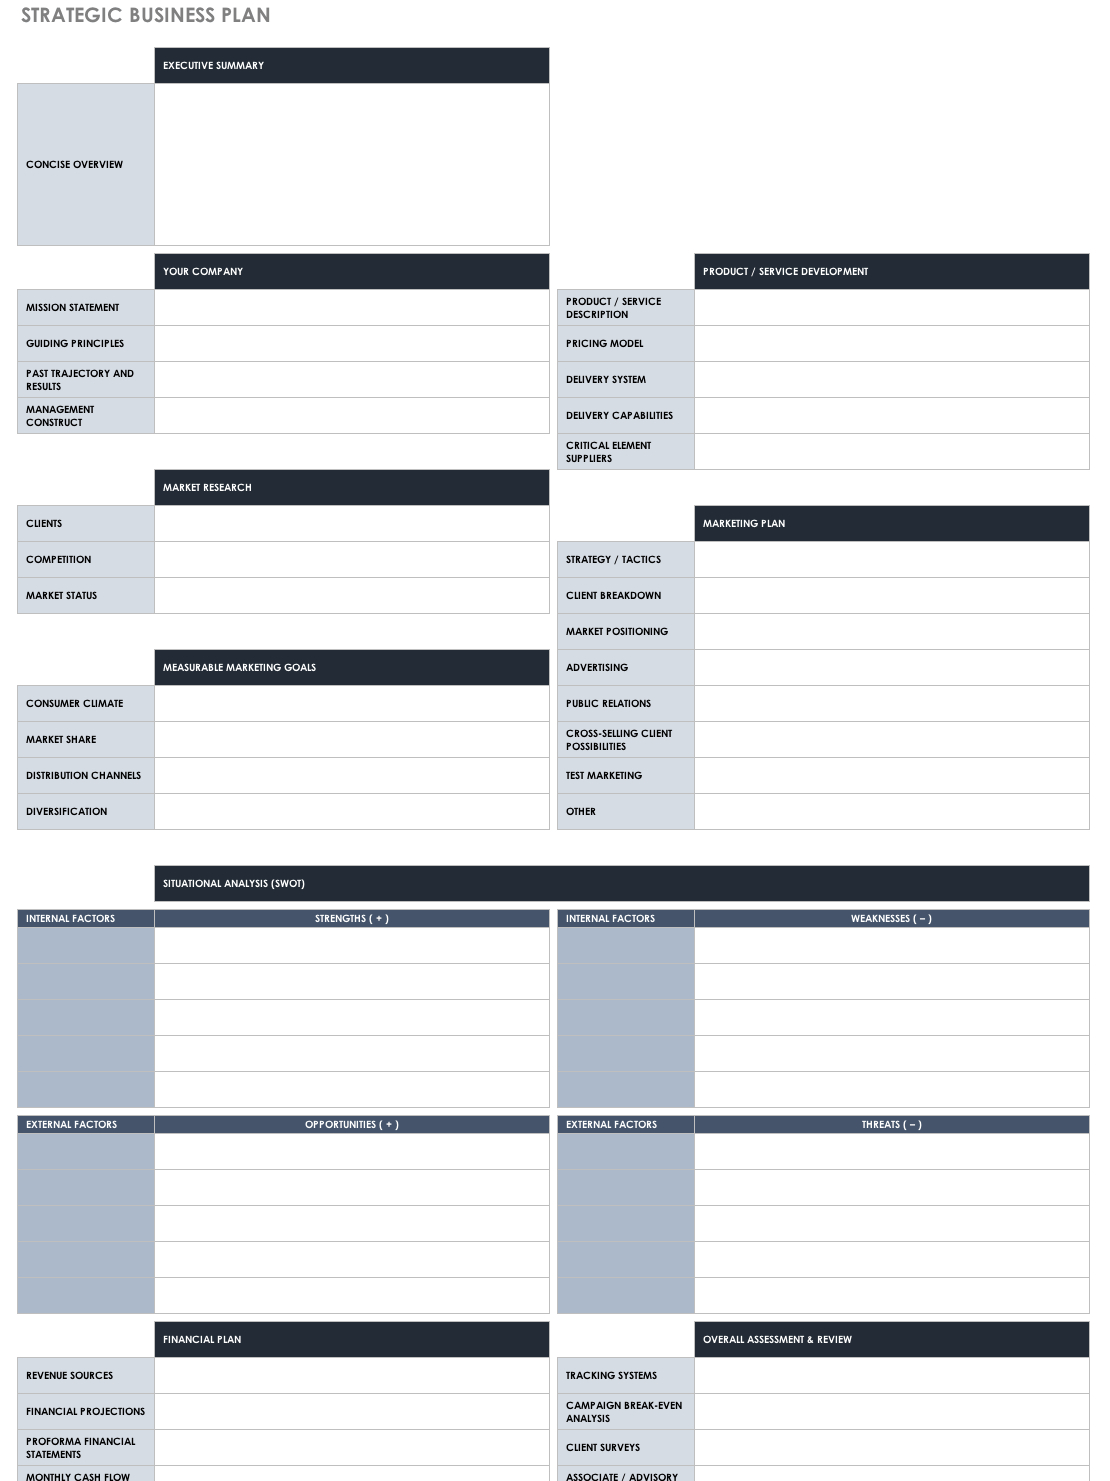 Download Free Ma Templates  Smartsheet within Legal Department Strategic Plan Template